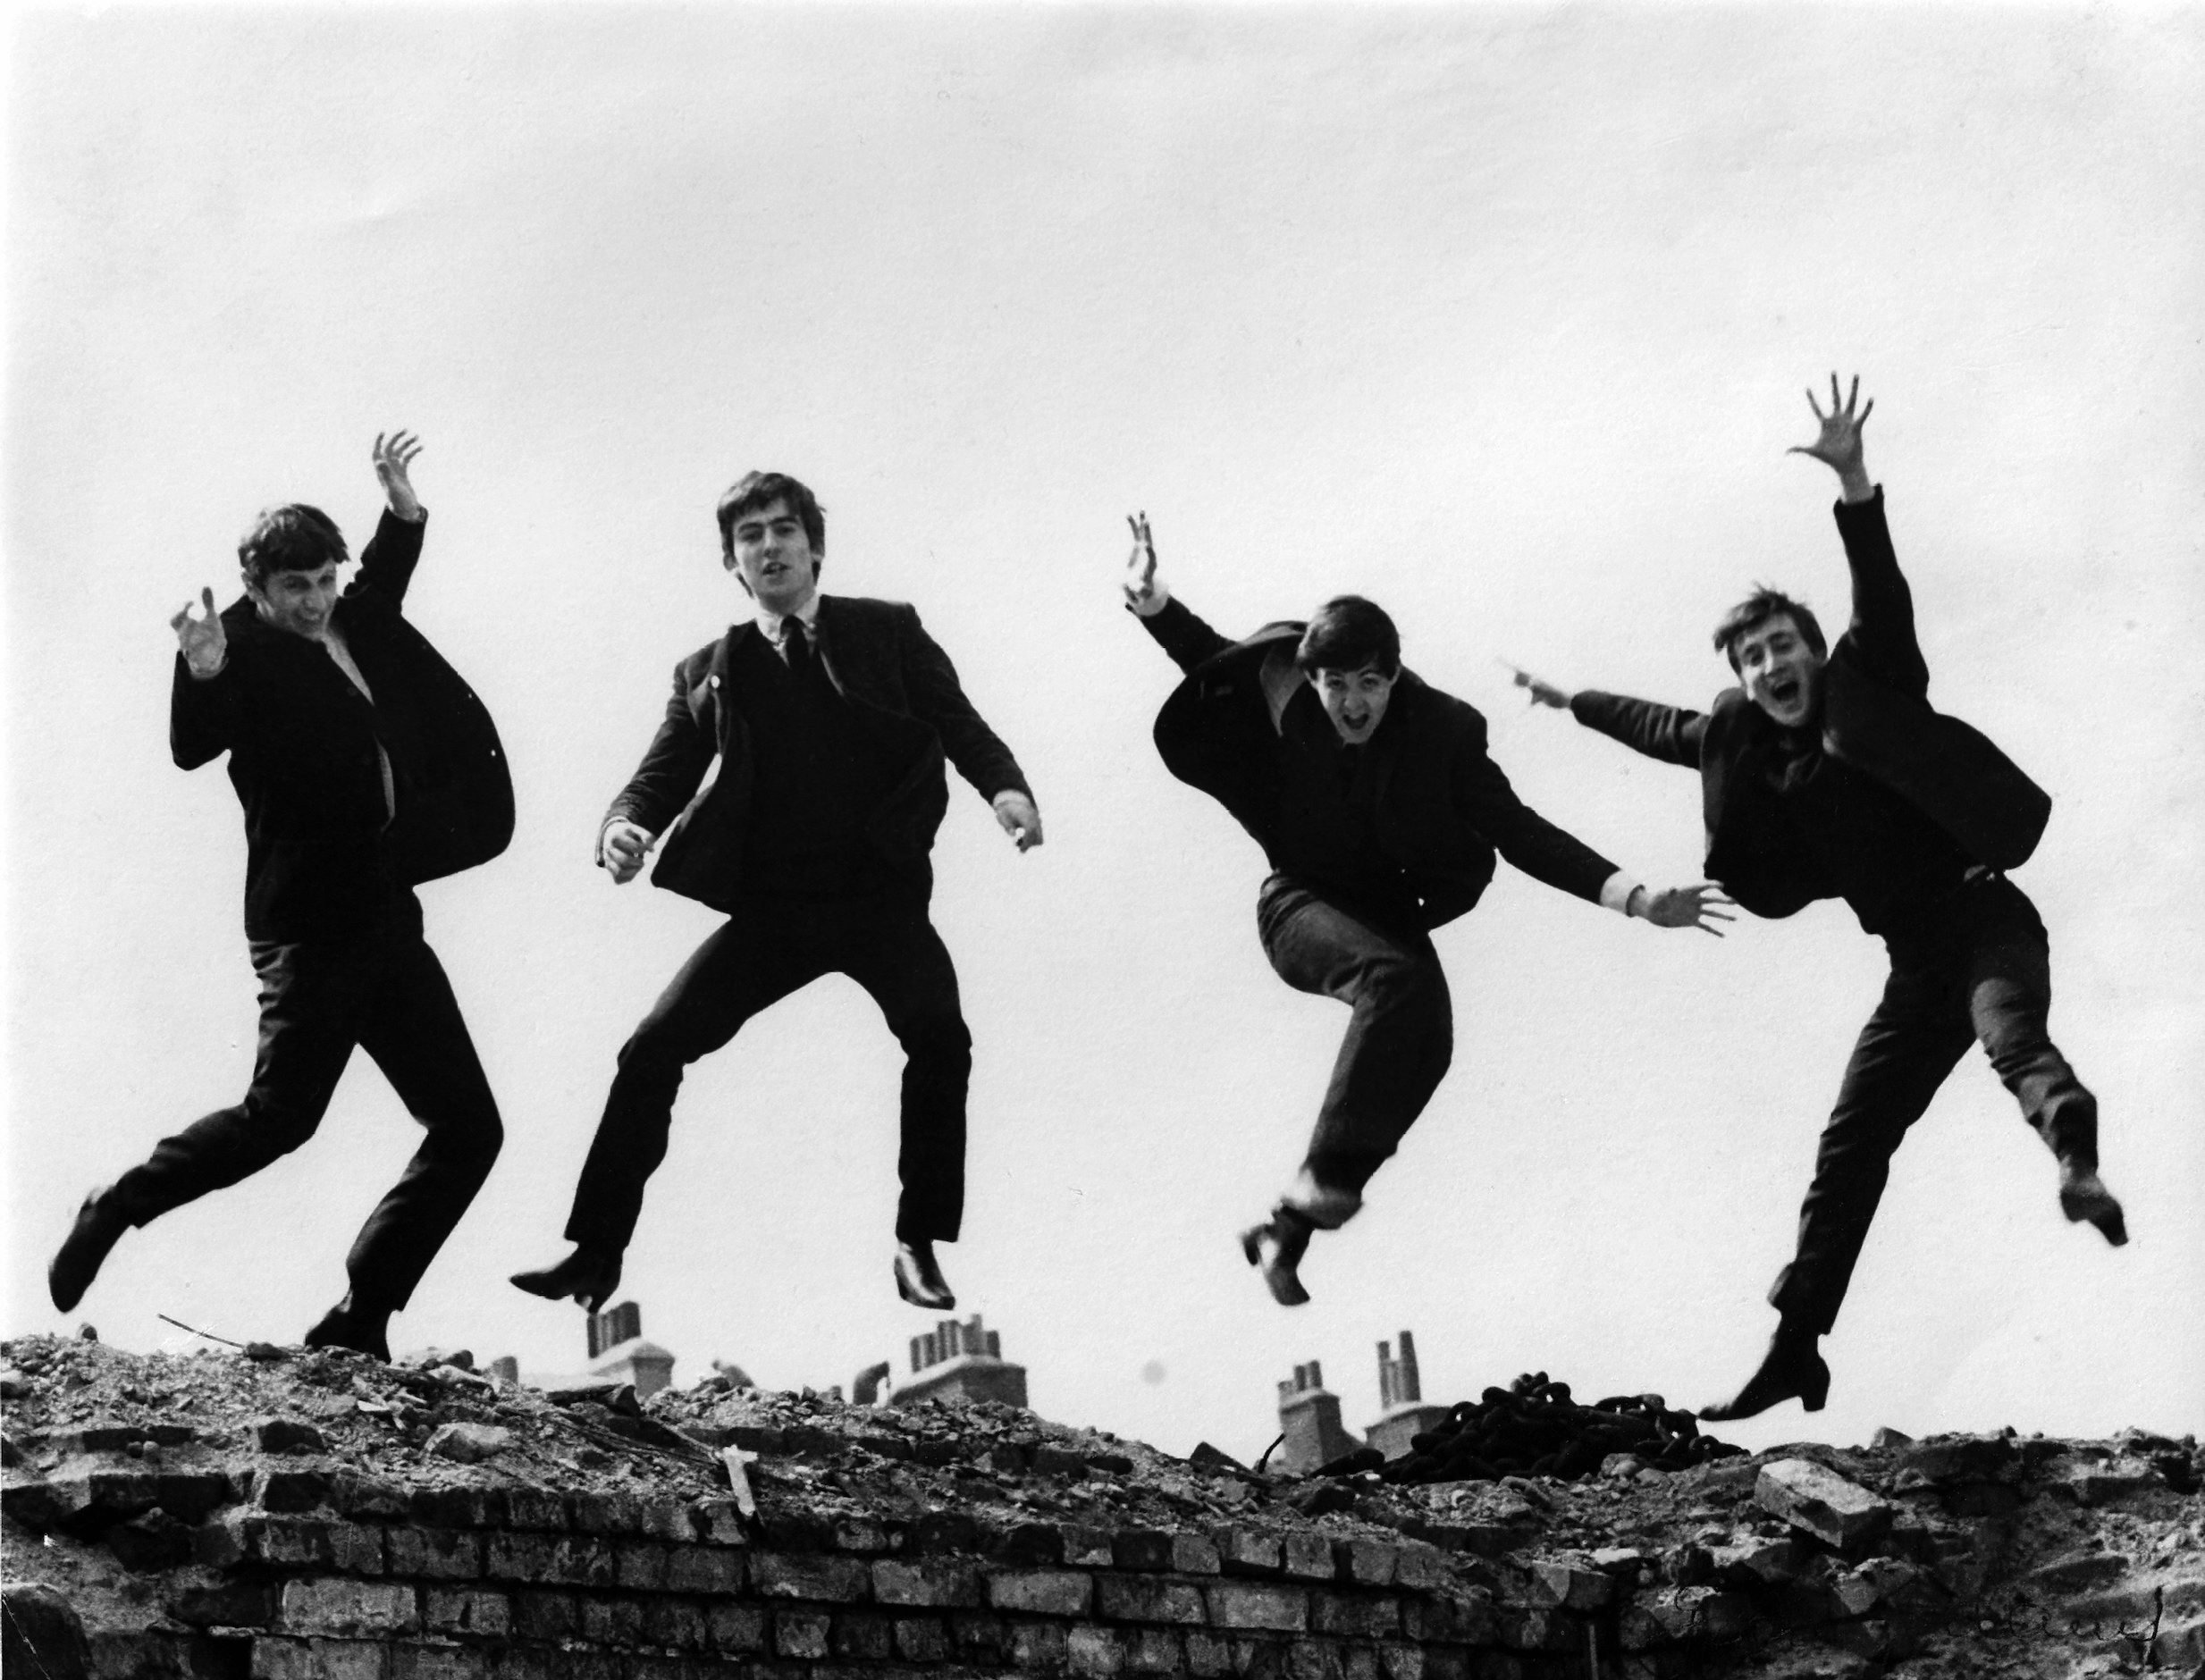 The Beatles jumping on a wall for Twist and Shout EP cover